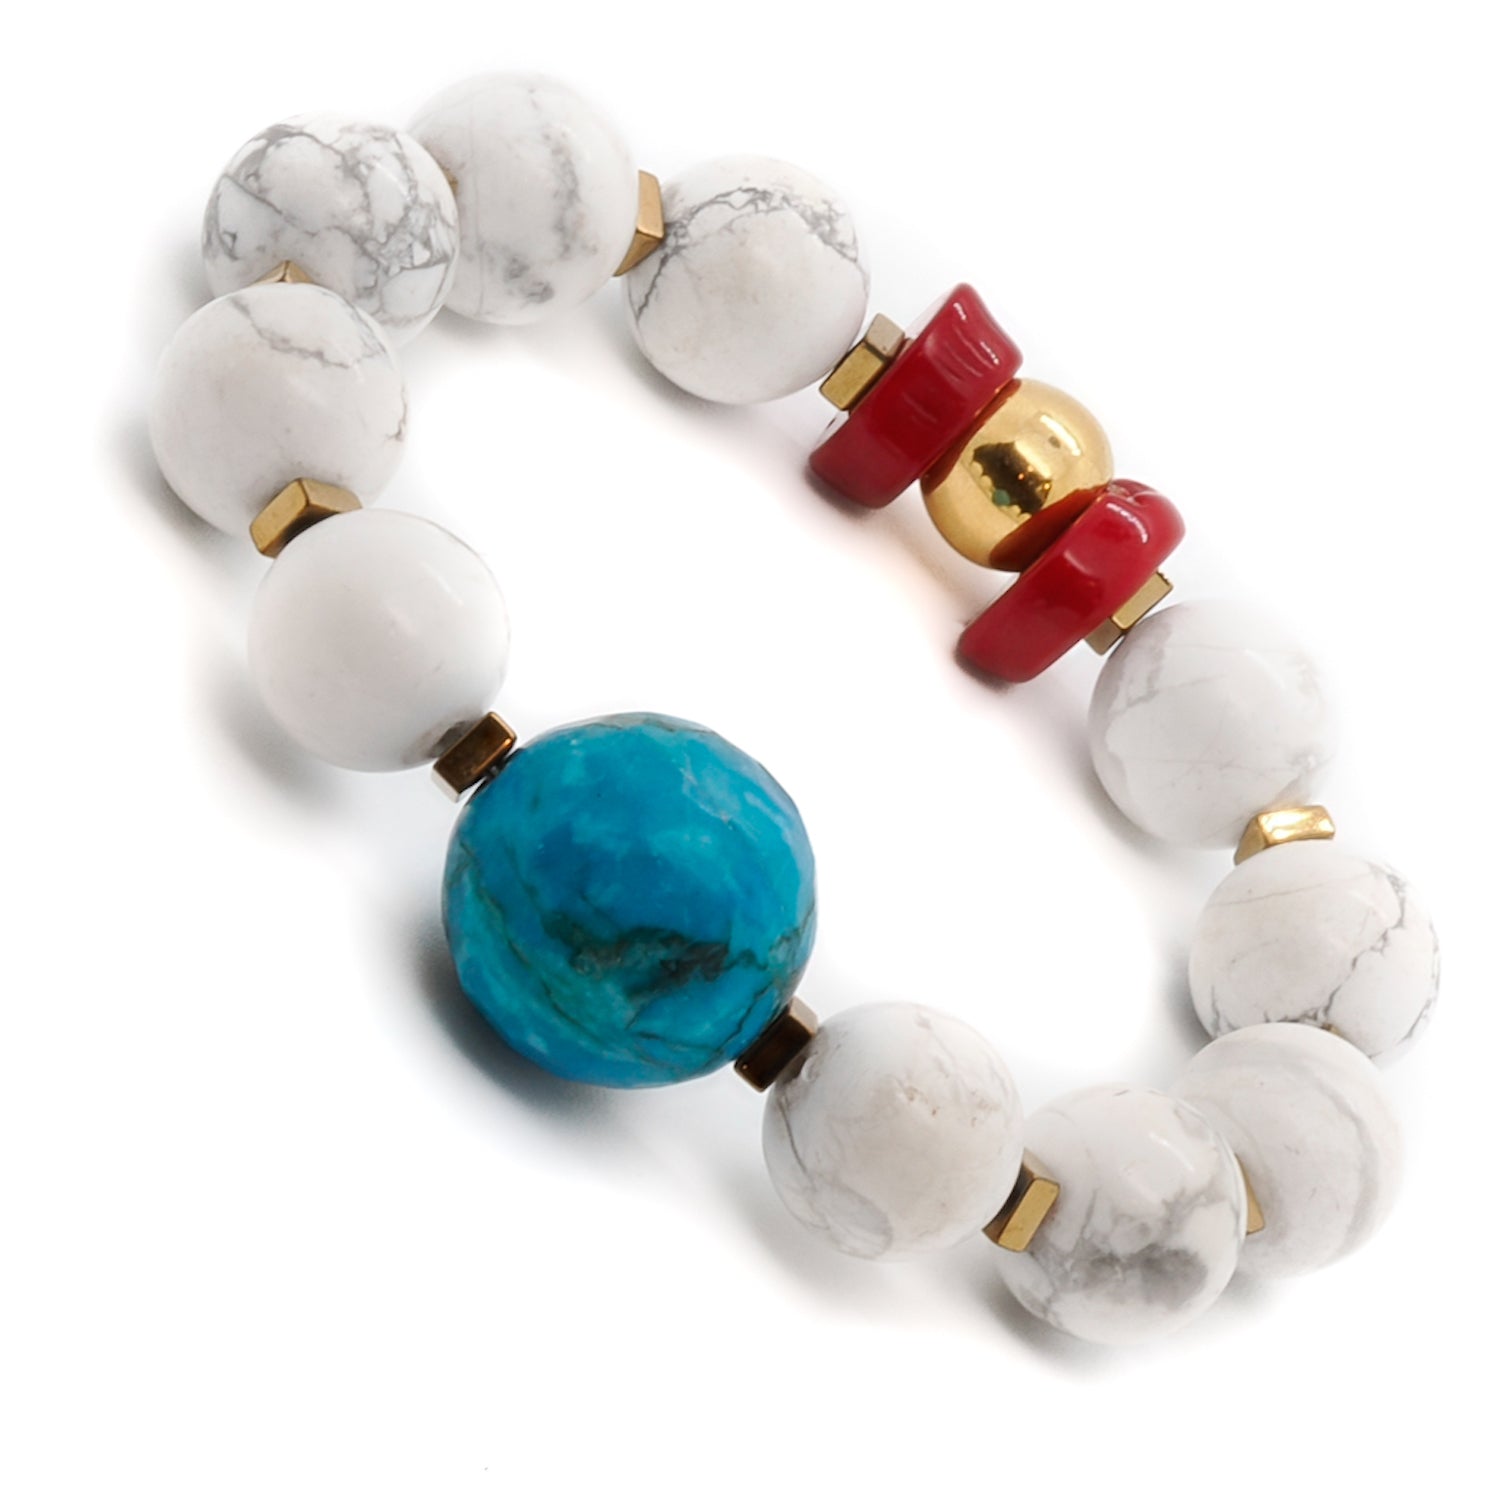 Experience the spiritual qualities of stillness and tenderness with the Turquoise Balance Bracelet, adorned with howlite and turquoise stones.